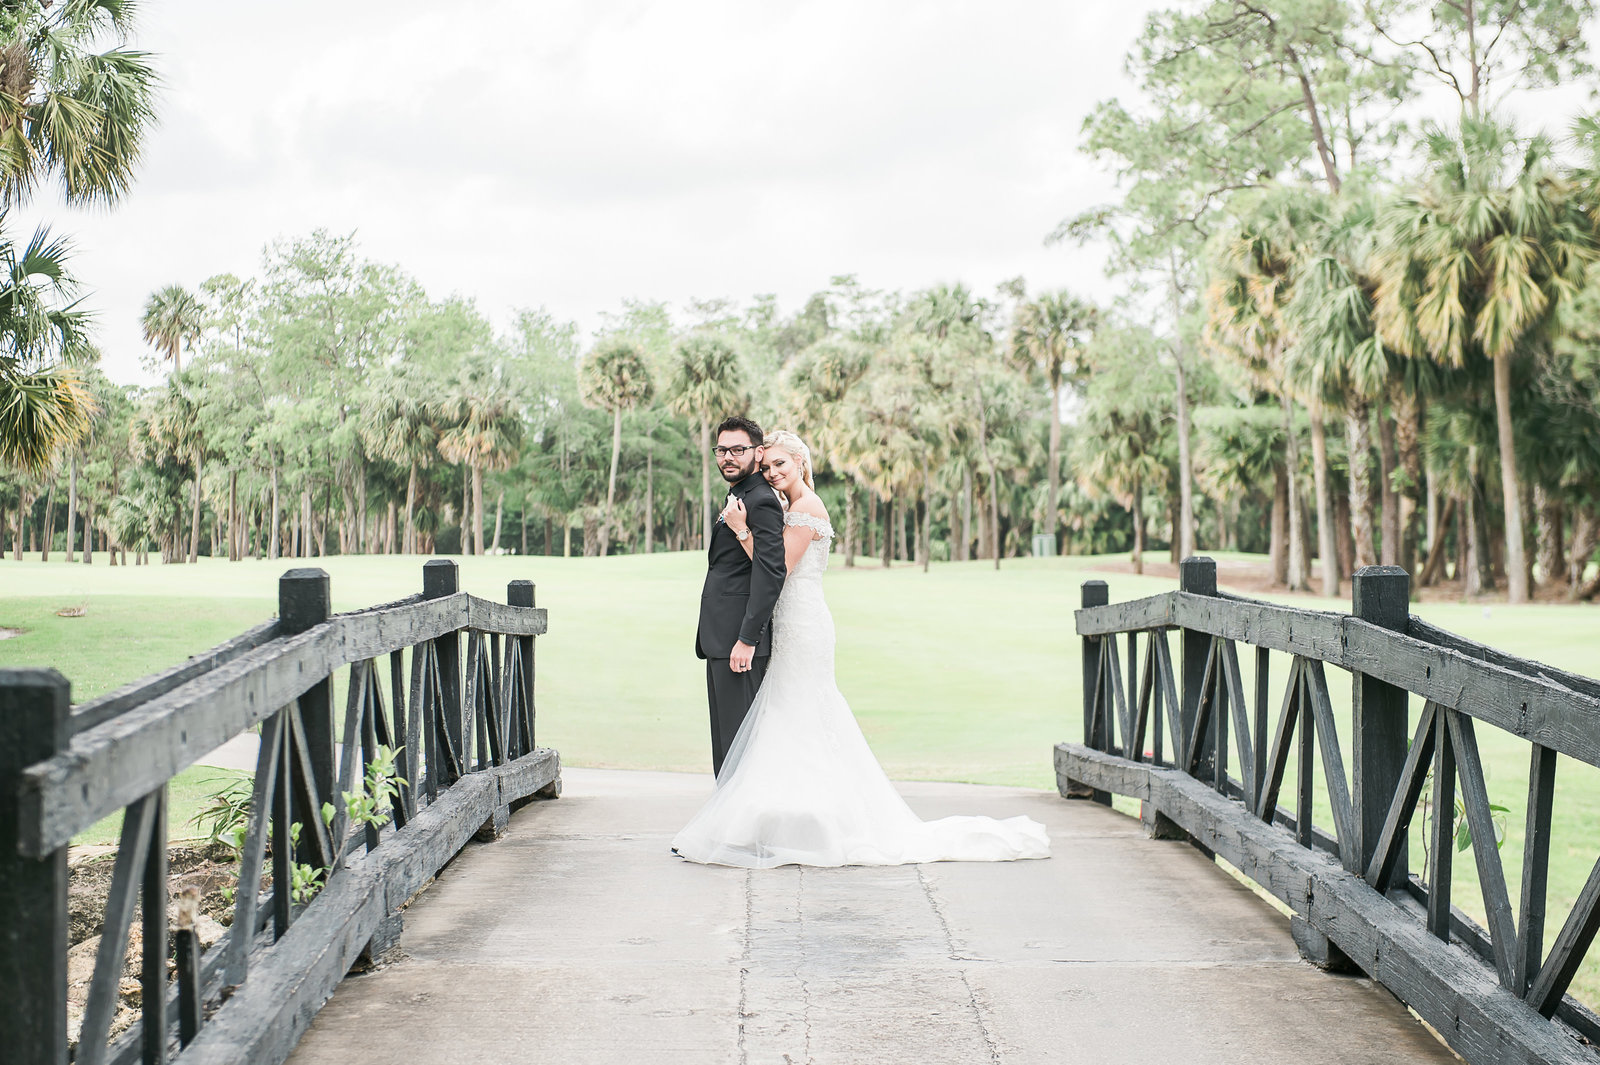 Snuggling Bride and Groom - Myacoo Country Club Wedding - Palm Beach Wedding Photography by Palm Beach Photography, Inc.